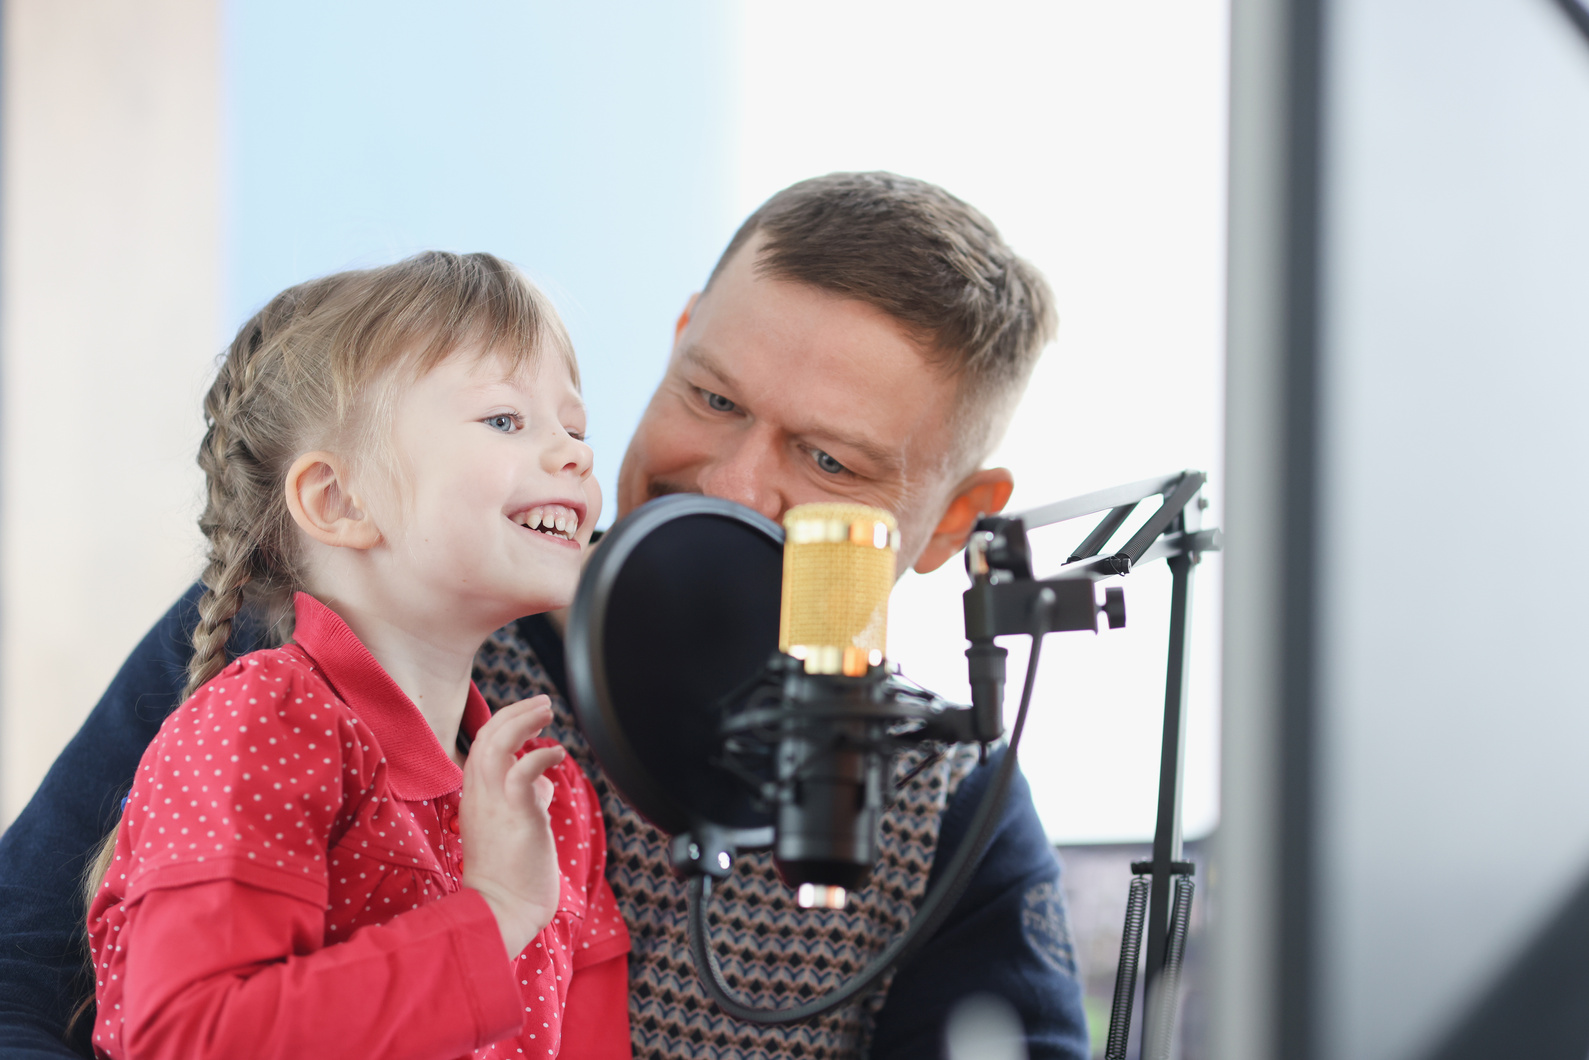 Man and Girl Are Recording Their Voice on Microphone